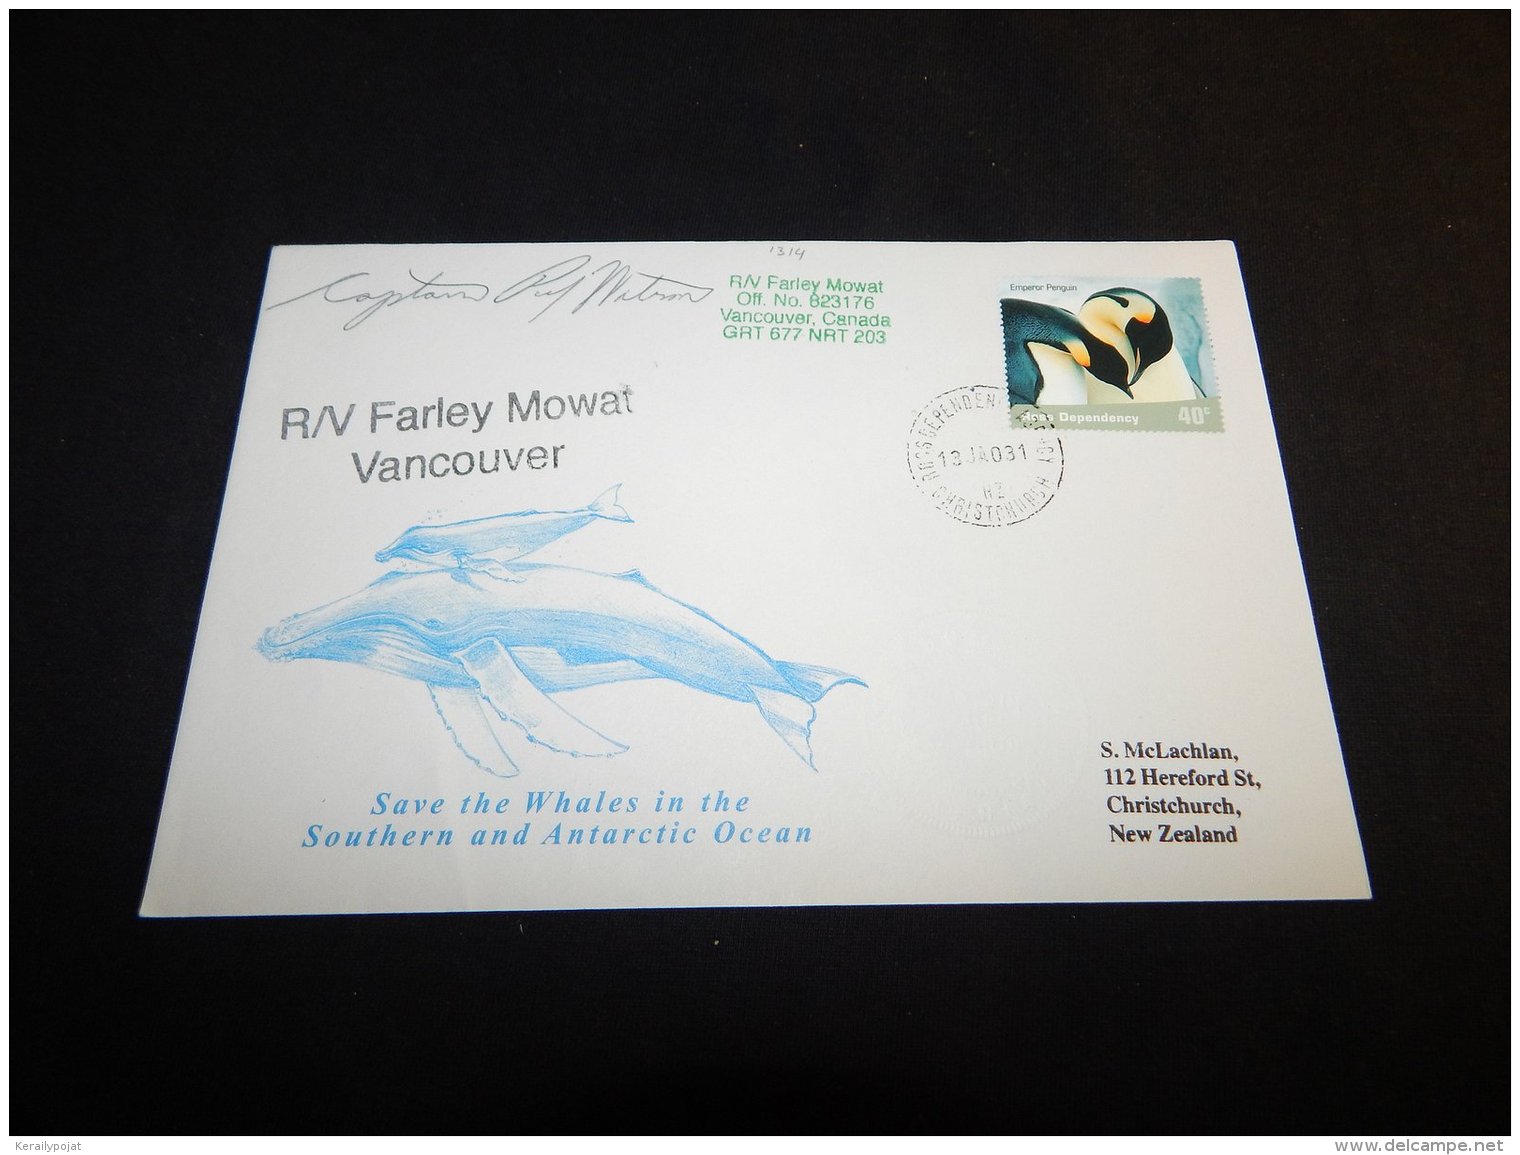 Ross Dependency 2003 R/V Farley Mowat Vancouver Cover__(LB-1314) - Covers & Documents